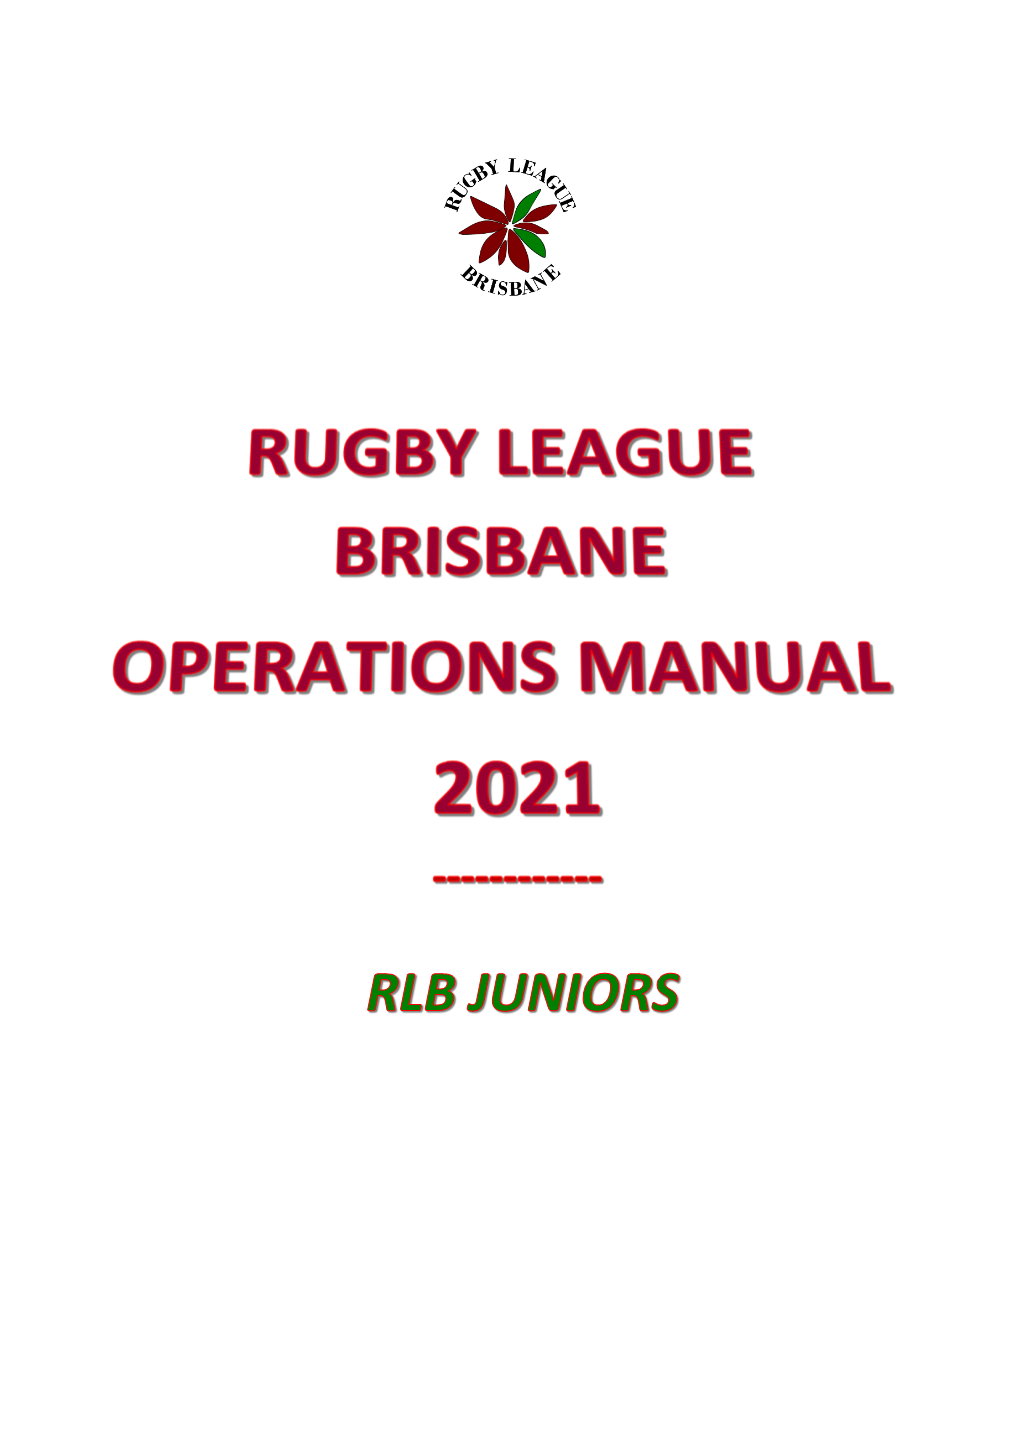 2021 Operations Manual for Rugby League Brisbane